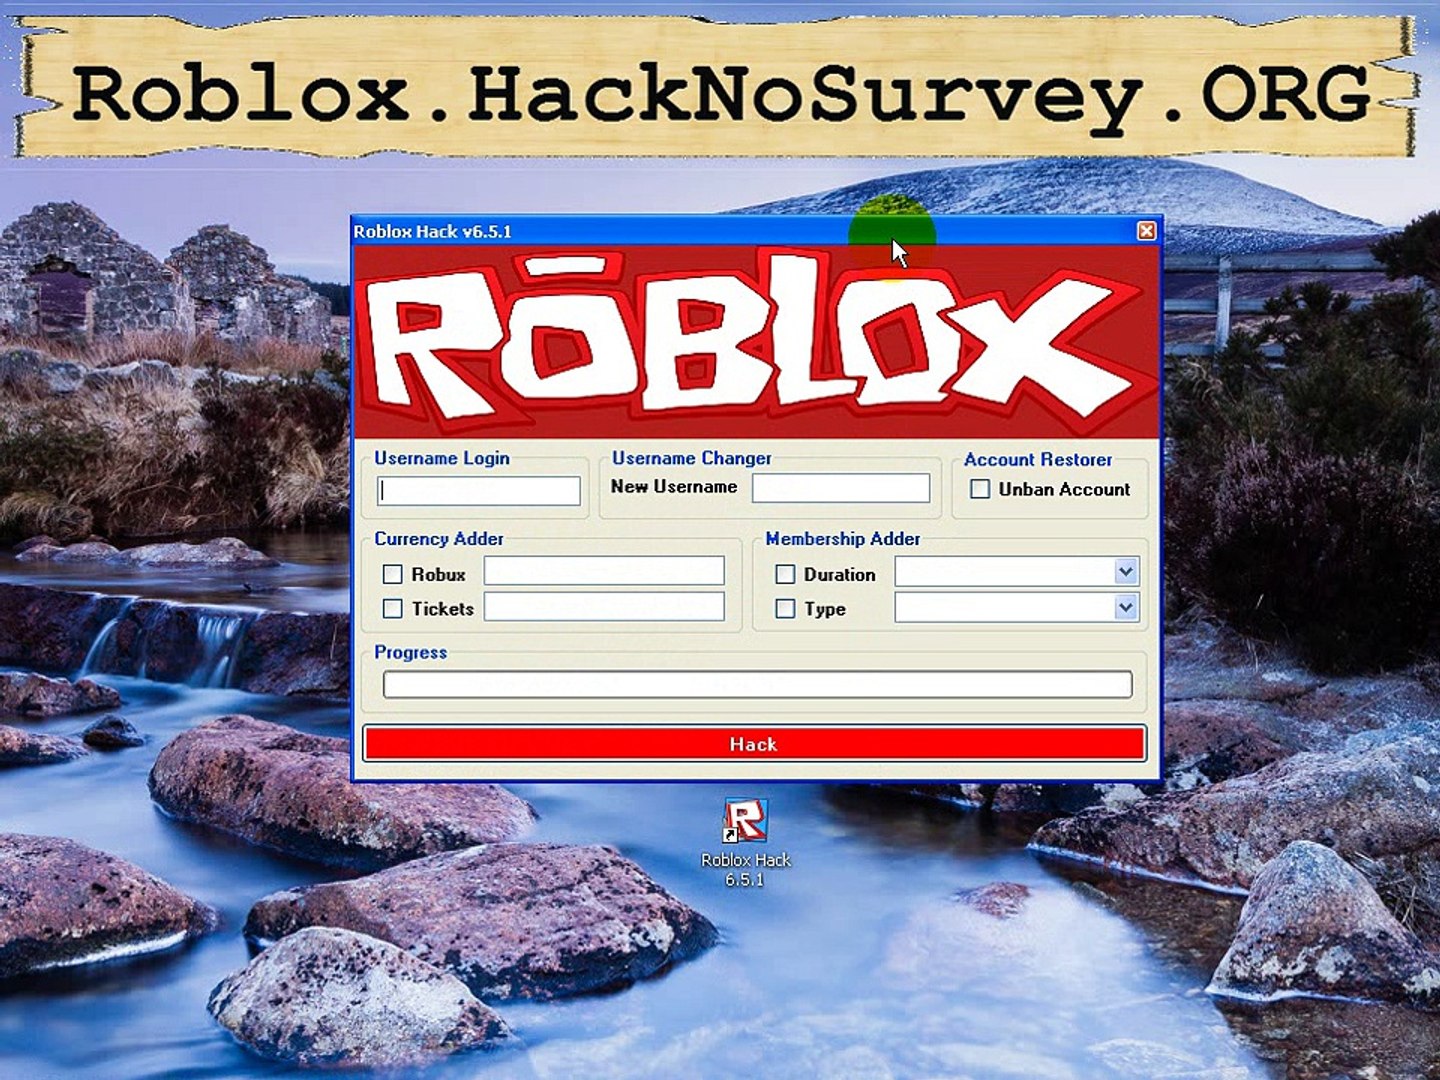 New Roblox Hack Generator For Robux And Tix No Survey March 2015 Video Dailymotion - robux hack v6.5